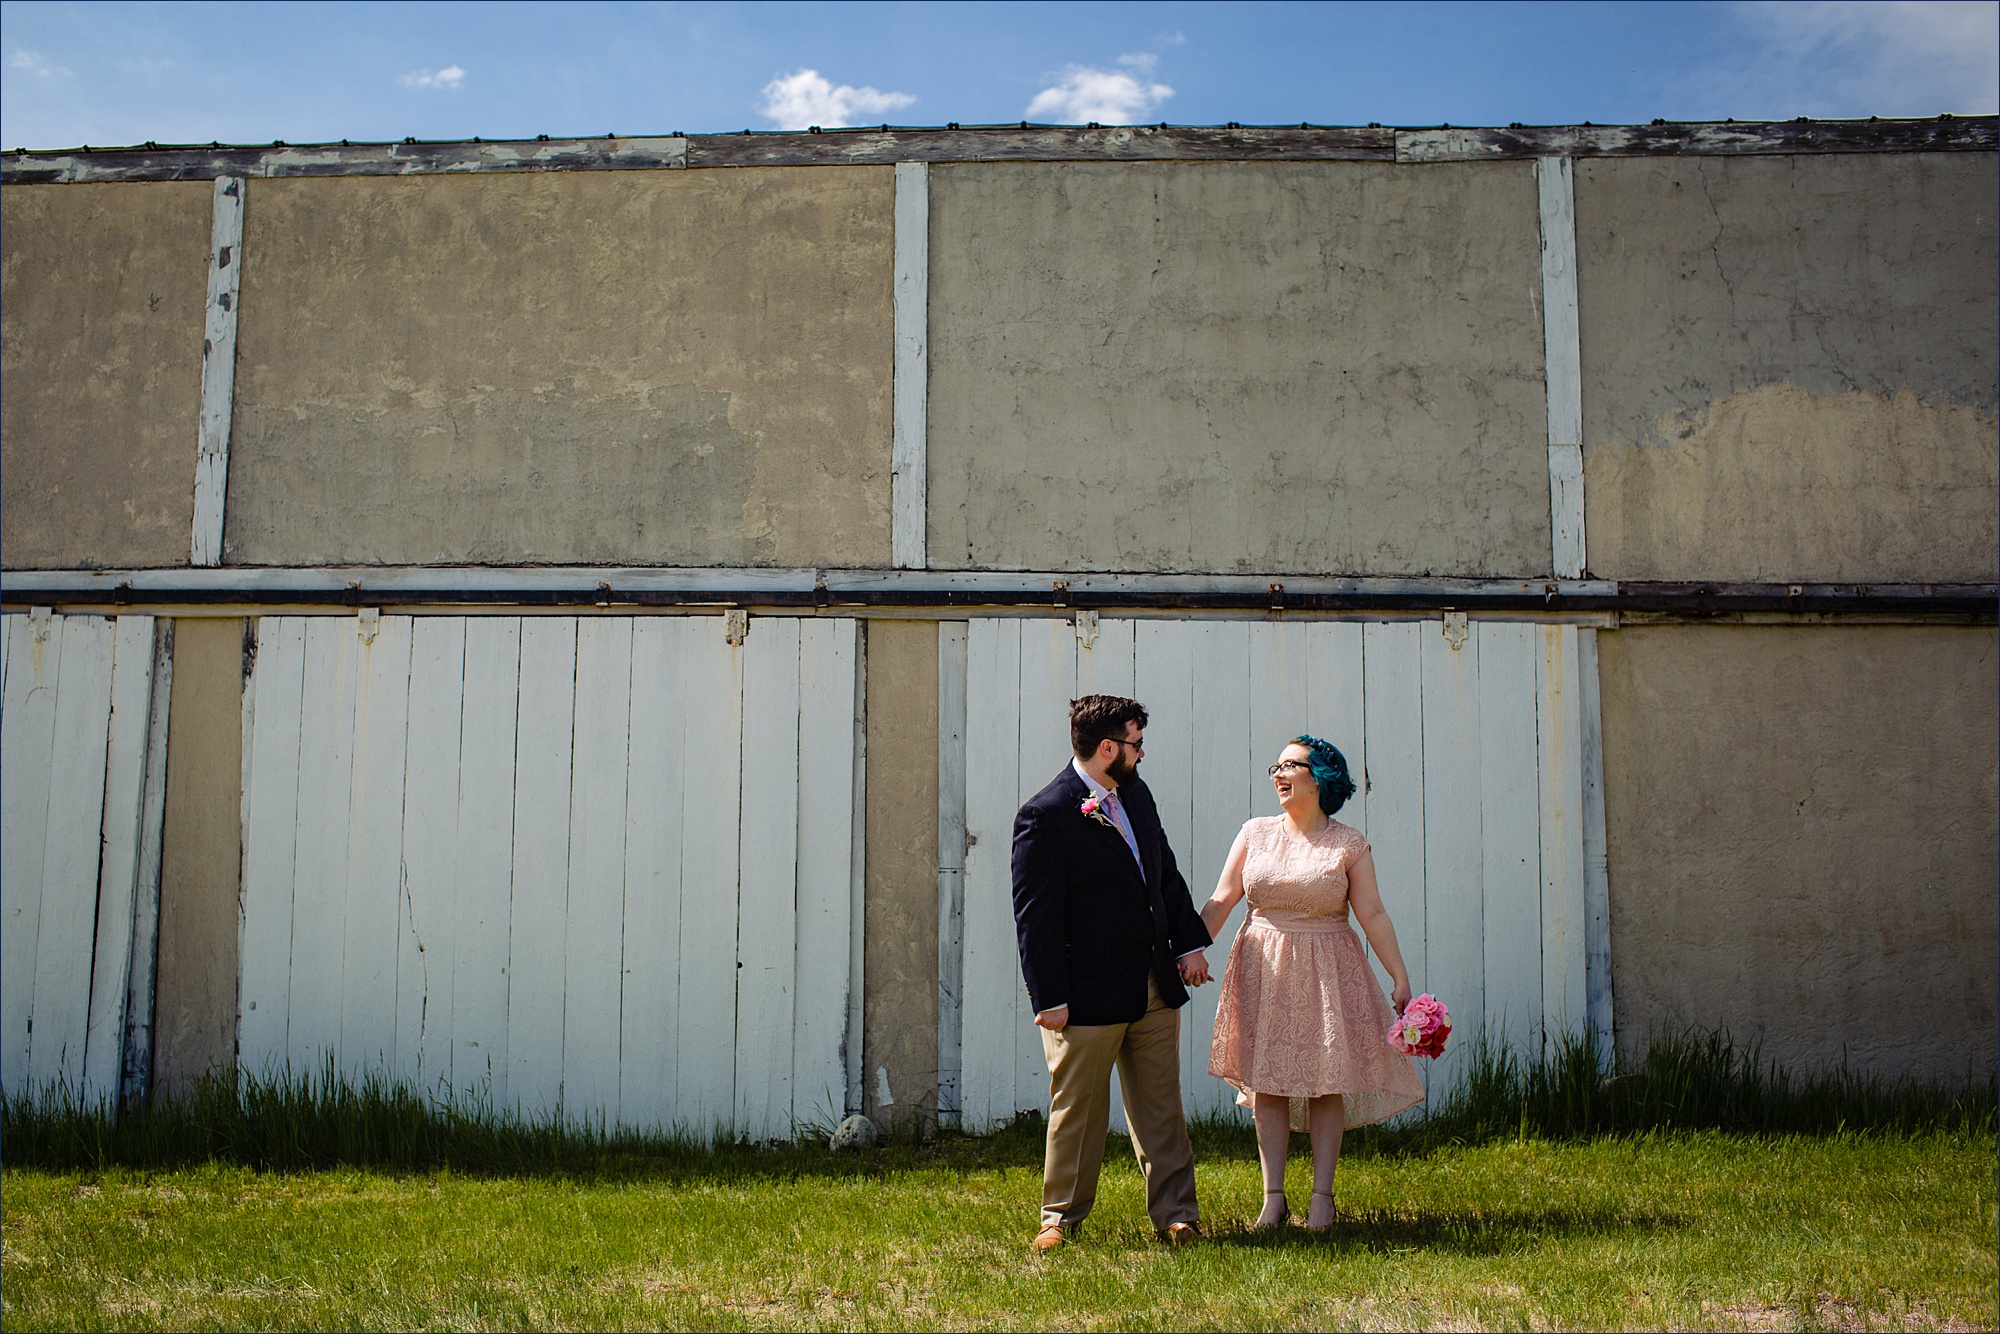 The groom and bride share a laugh in front of a garage at his family's Maine farmhouse